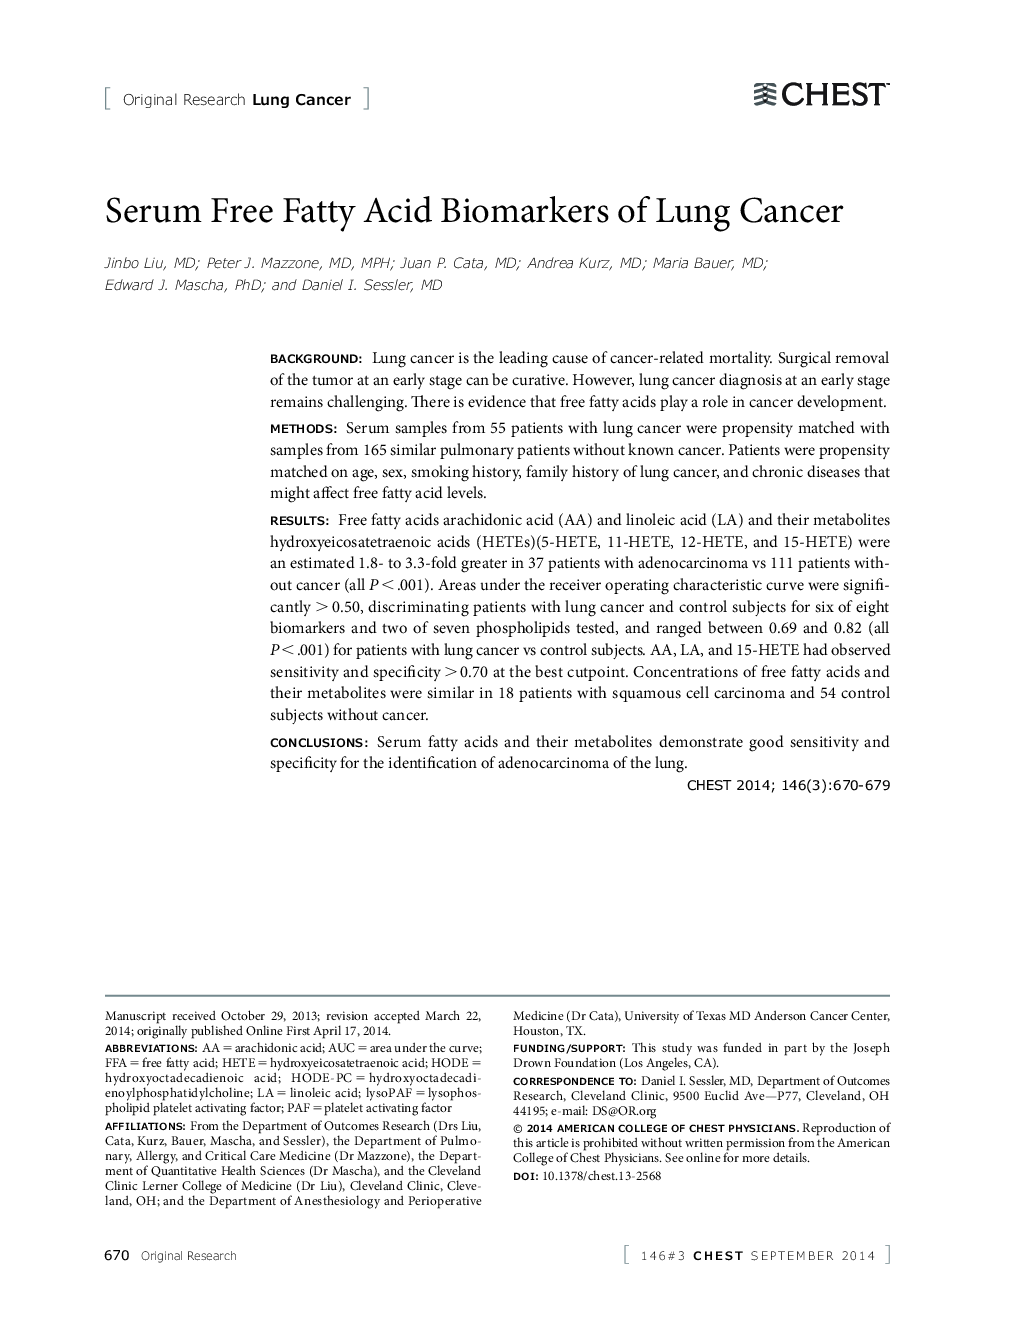 Serum Free Fatty Acid Biomarkers of Lung Cancer 